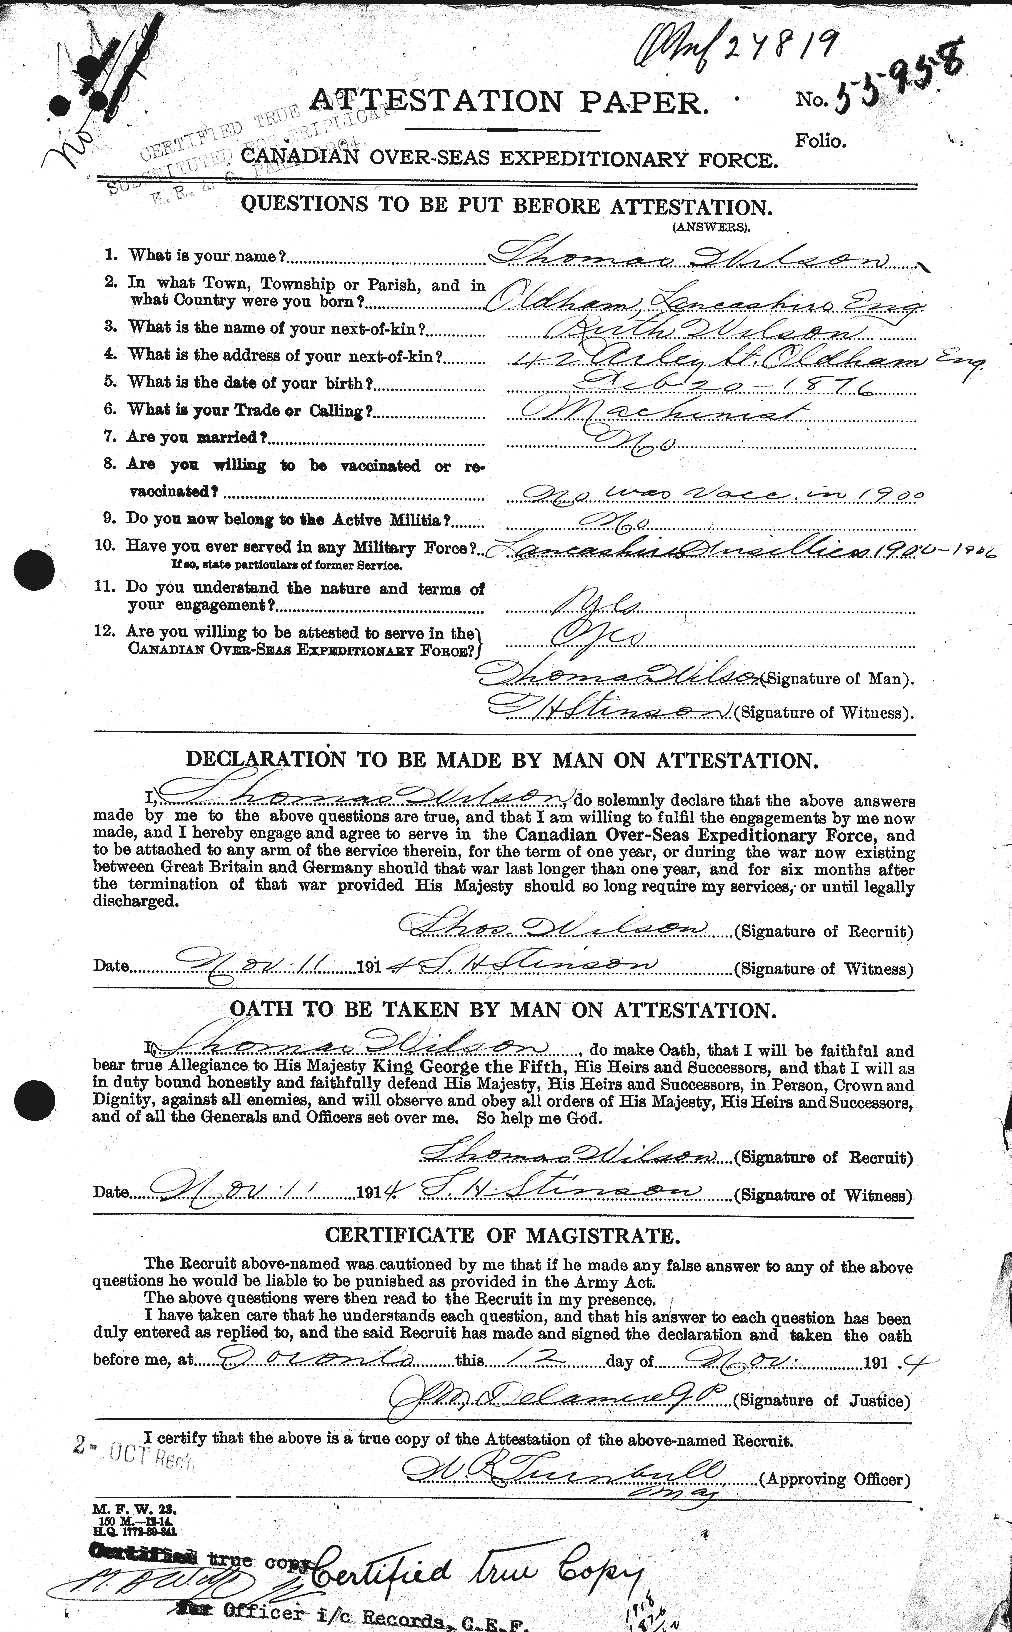 Personnel Records of the First World War - CEF 681189a